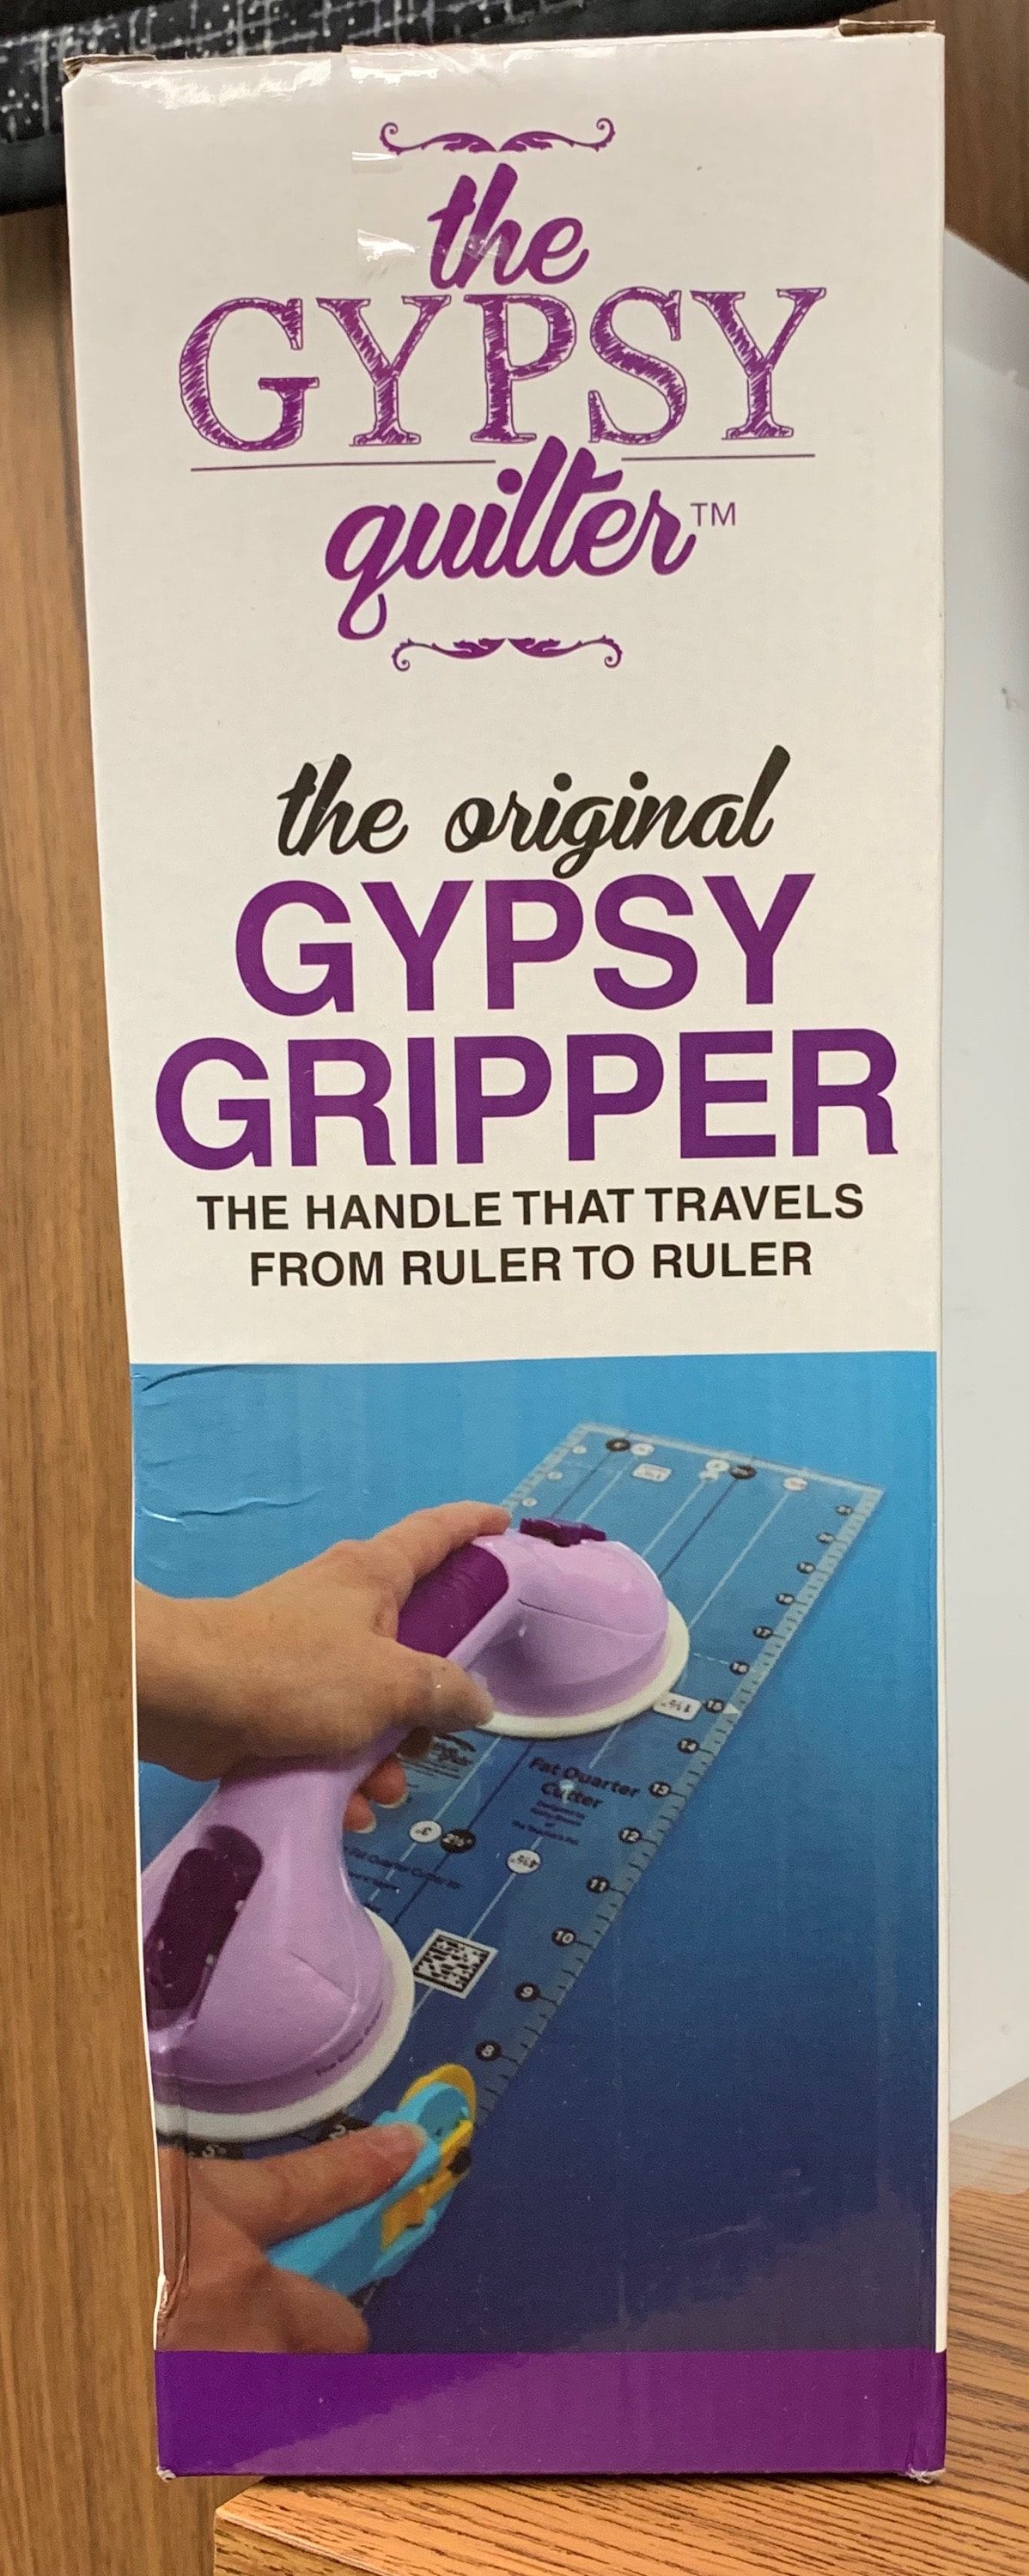 The Gypsy Quilter -The Original Gypsy Gripper - The Handle that Travels from Ruler to Ruler